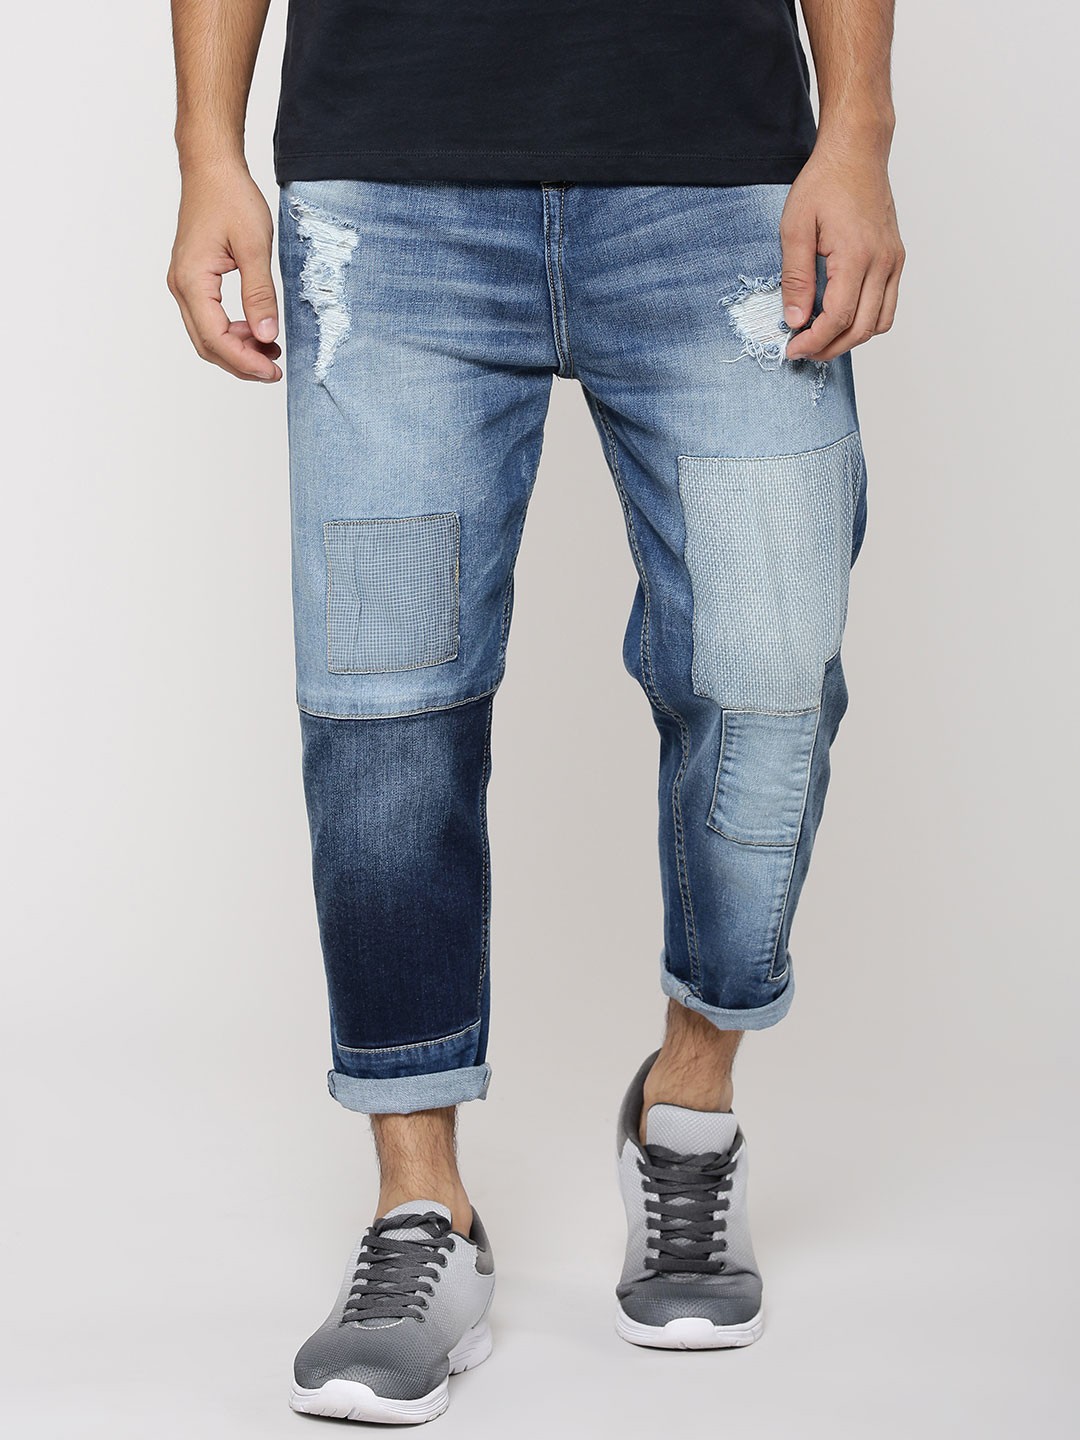 Cropped Jeans for Men